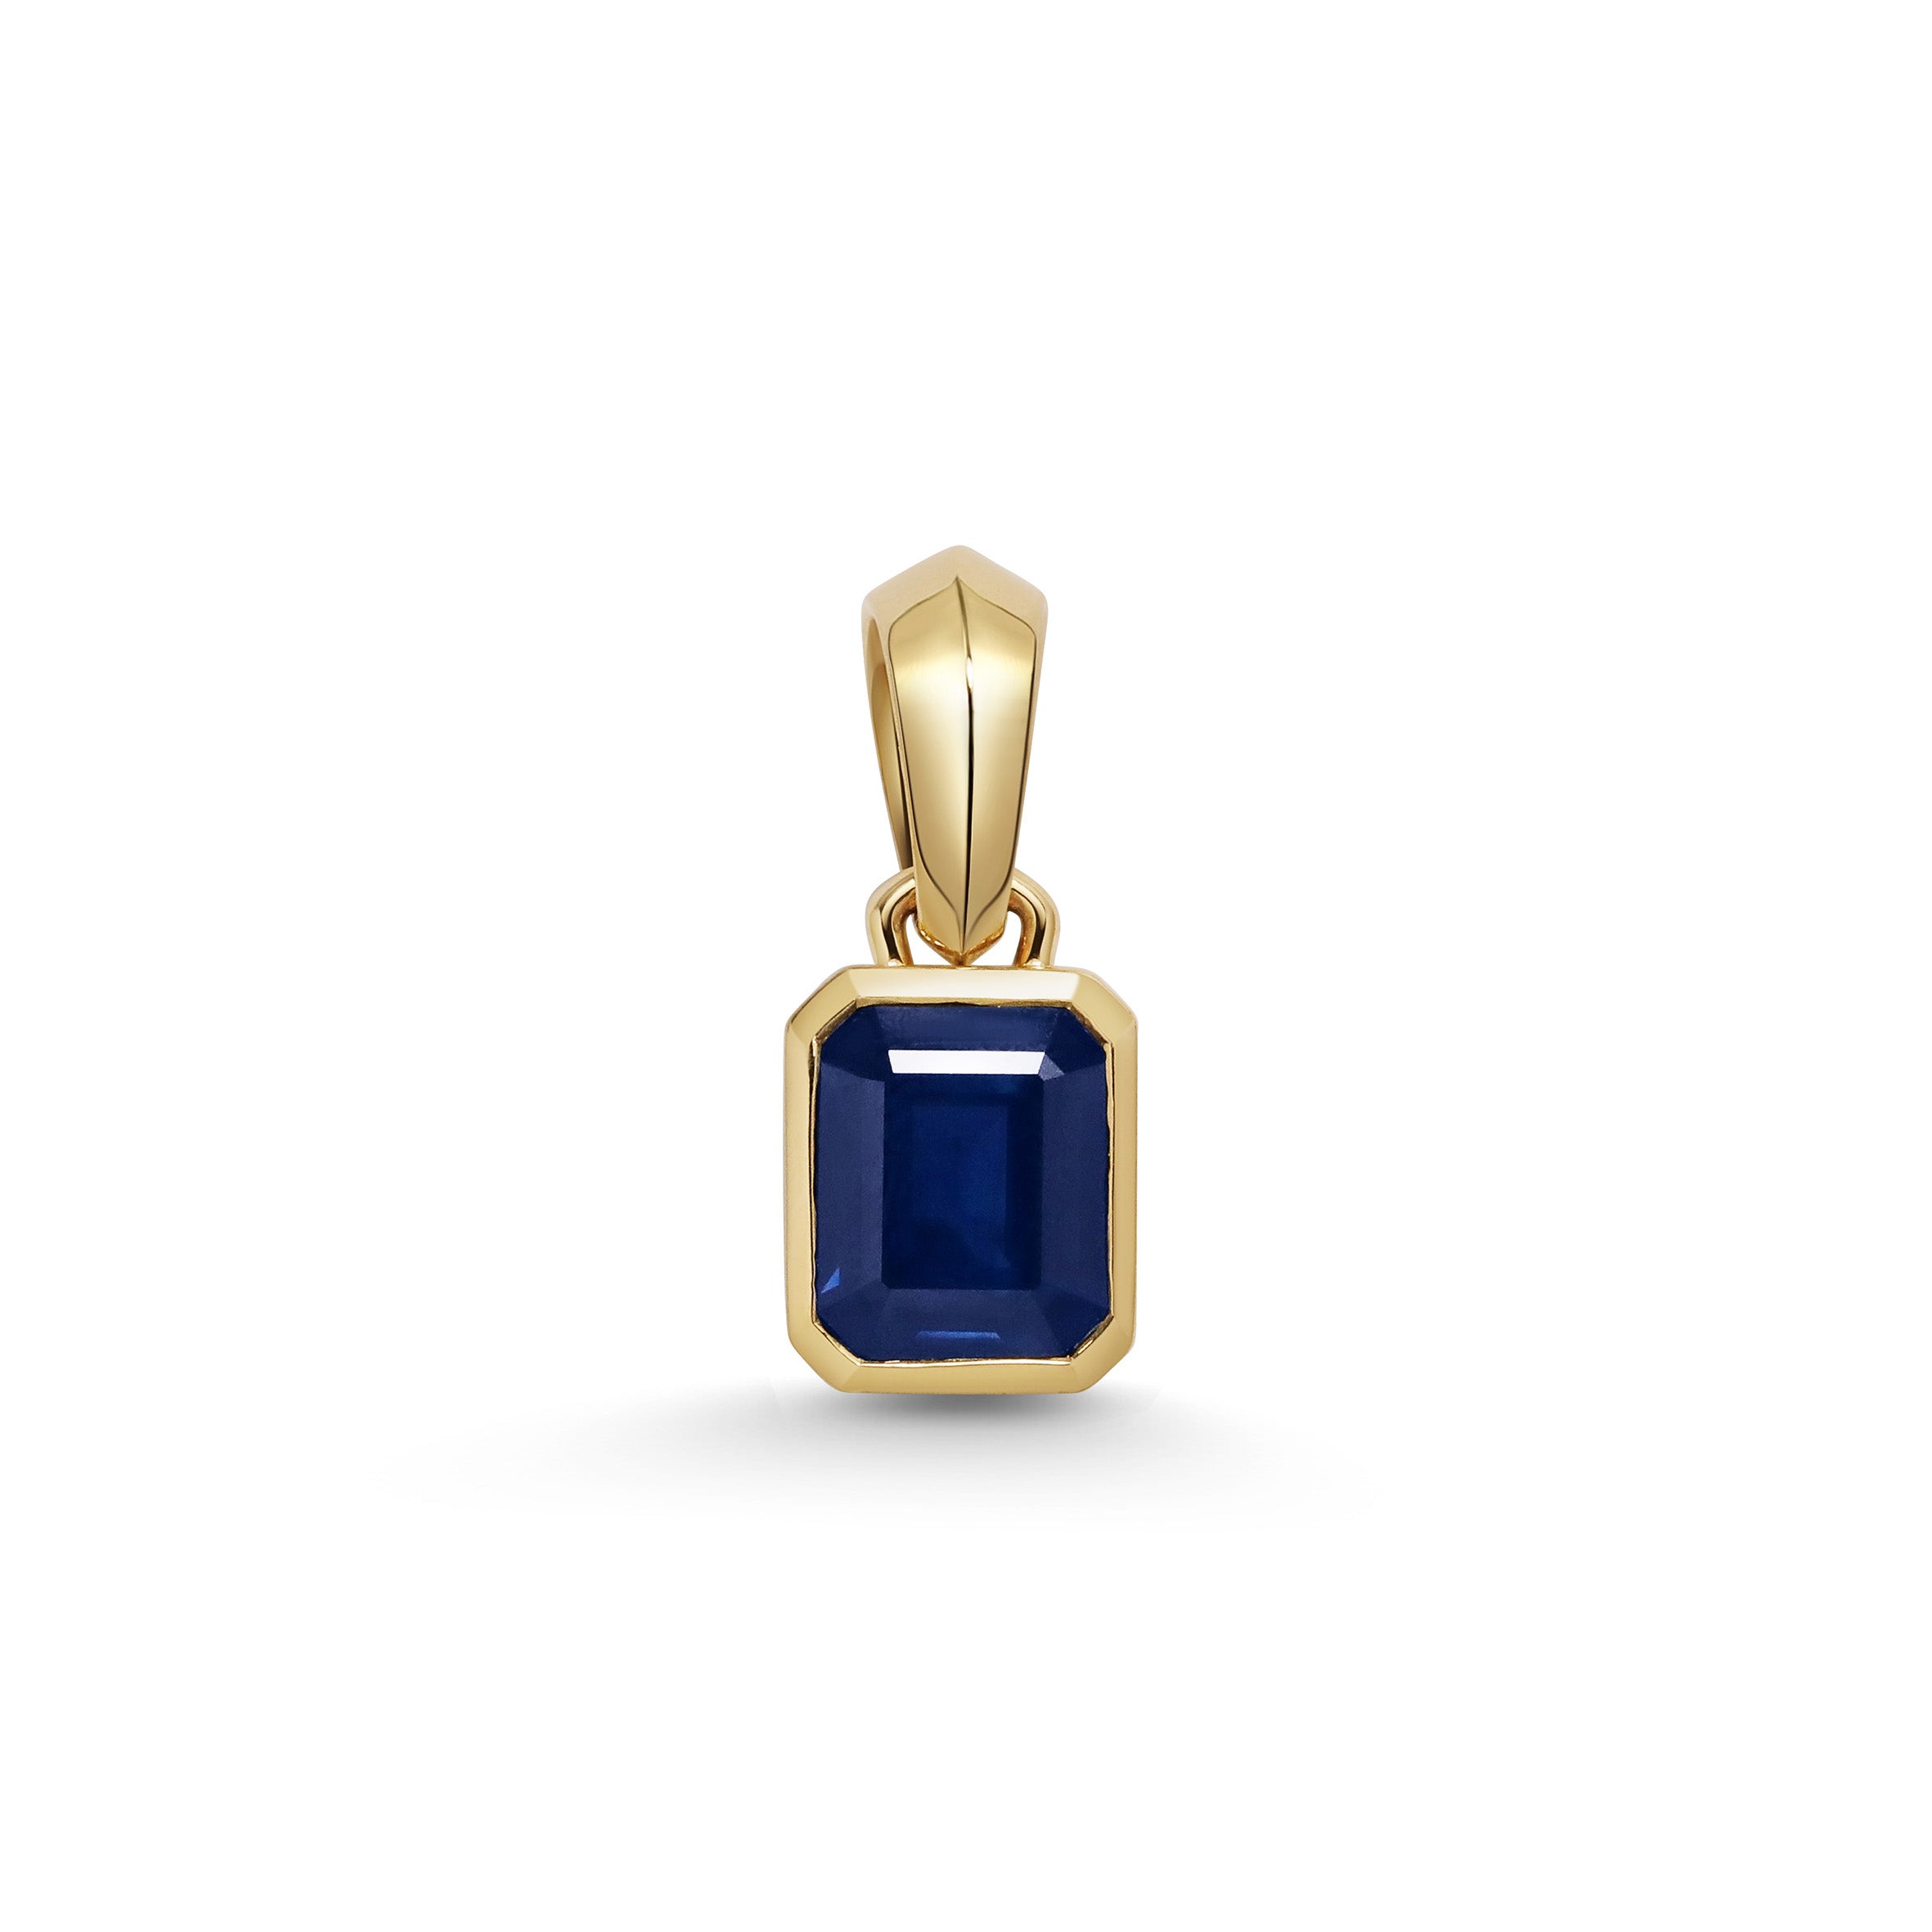 The Chunky Charm Pendant - Sapphire 3.10ct by East London jeweller Rachel Boston | Discover our collections of unique and timeless engagement rings, wedding rings, and modern fine jewellery.